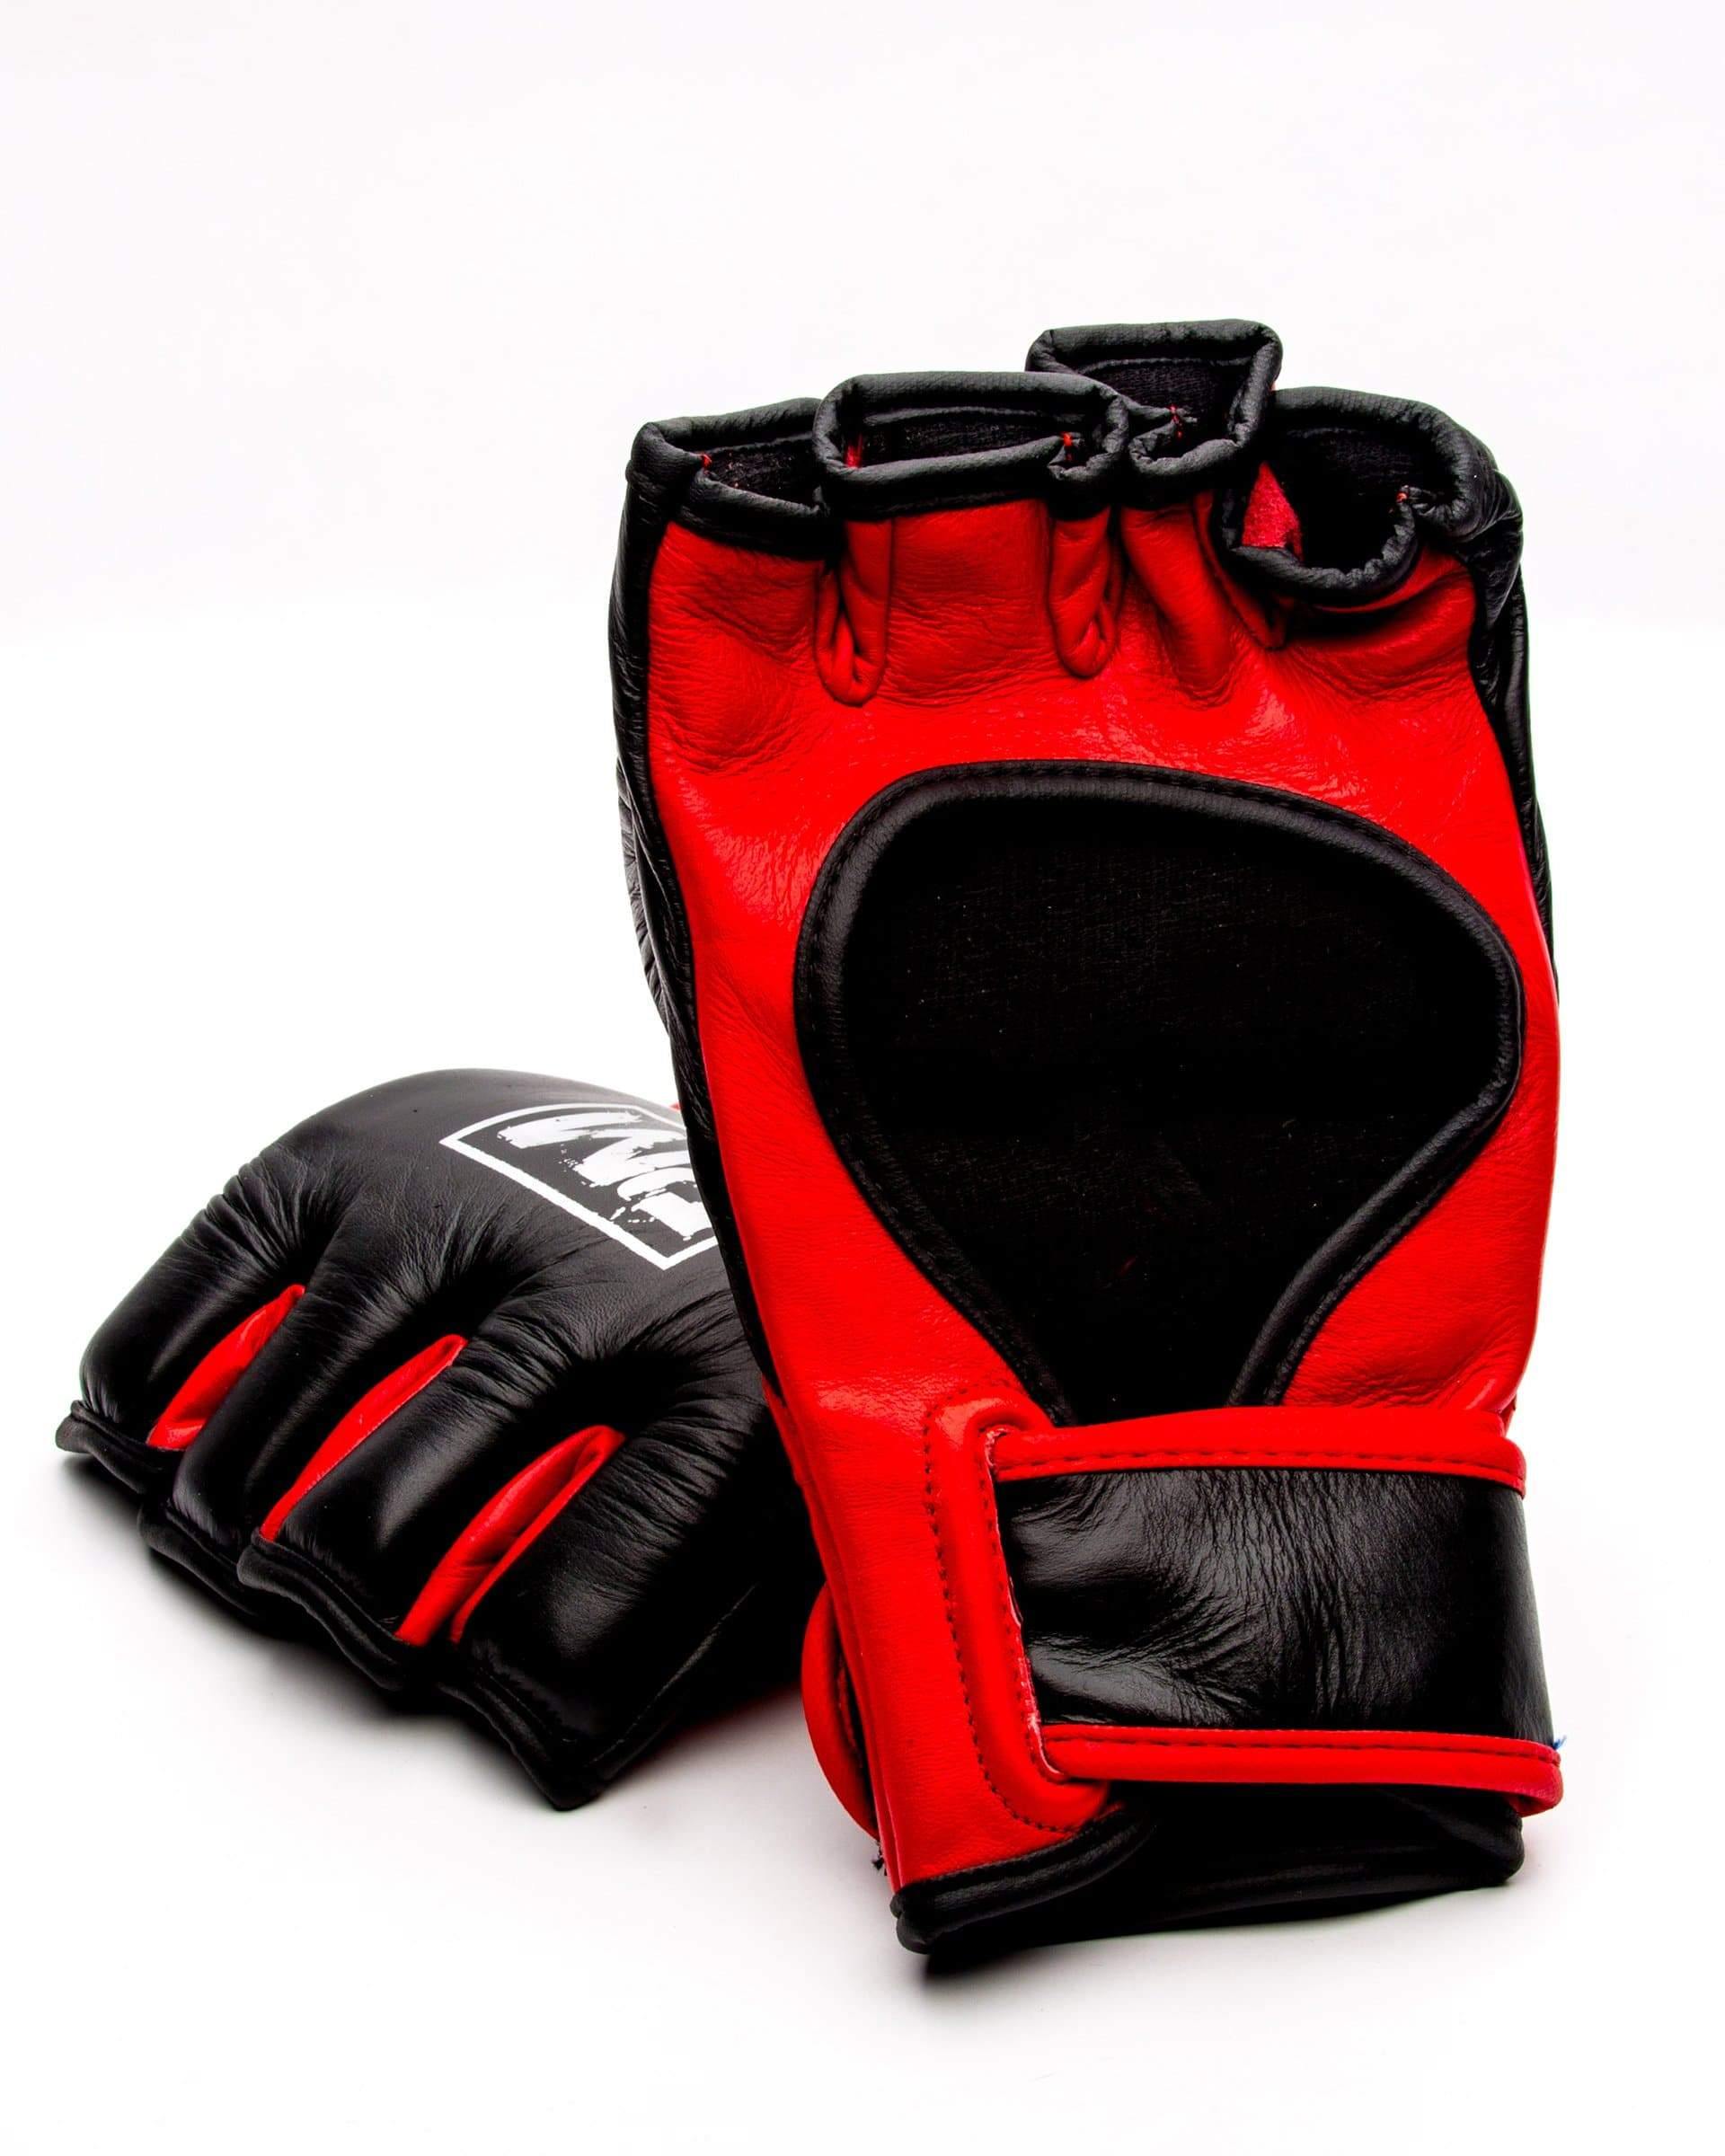 RingMaster Sports MMA Gloves Genuine Leather Black and Red Image 3